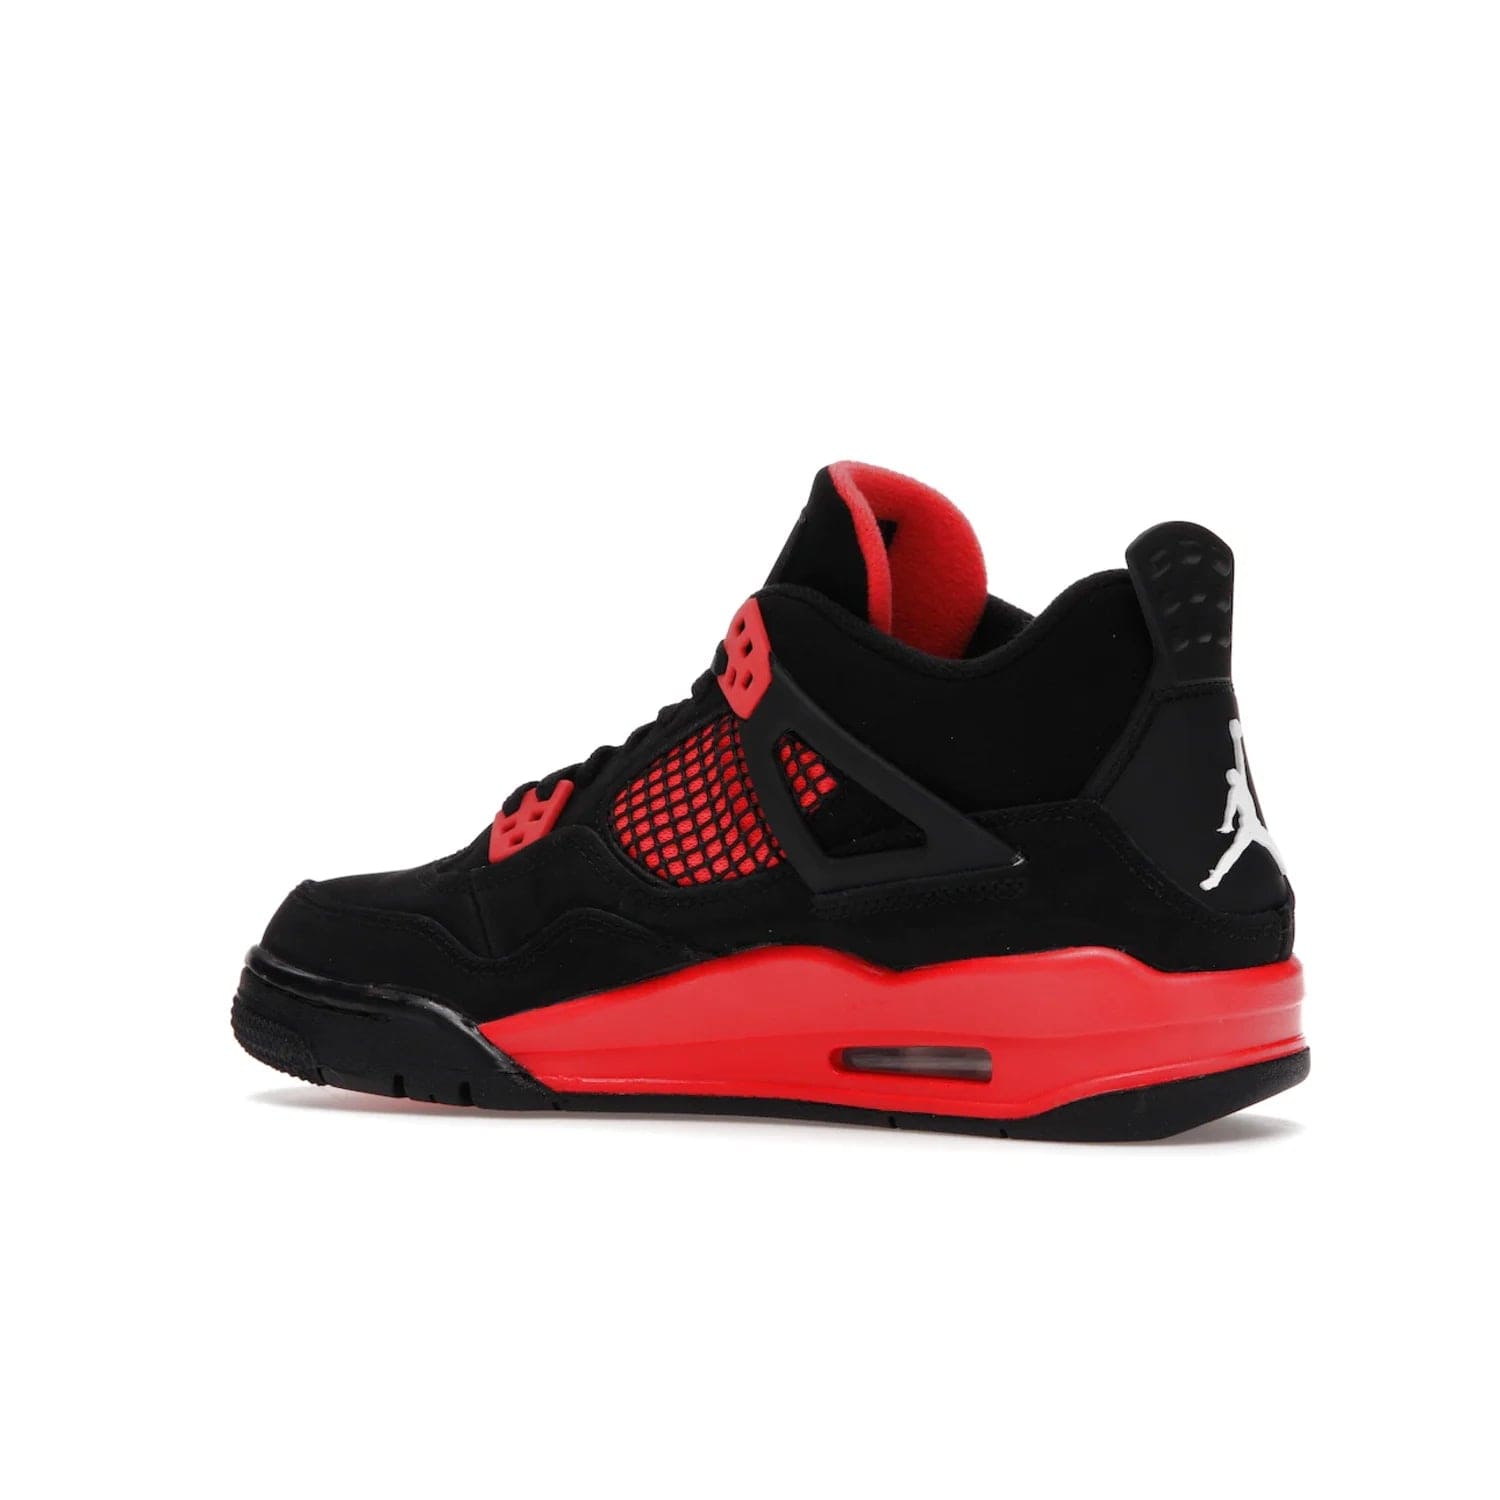 Jordan 4 Retro Red Thunder (GS) - Image 22 - Only at www.BallersClubKickz.com - The Air Jordan 4 Retro Red Thunder GS features a stylish black and crimson upper with a Jumpman logo. Athletic midsole with Air bubbles for cushioning and black rubber outsole with iconic motif complete this classic sneaker.